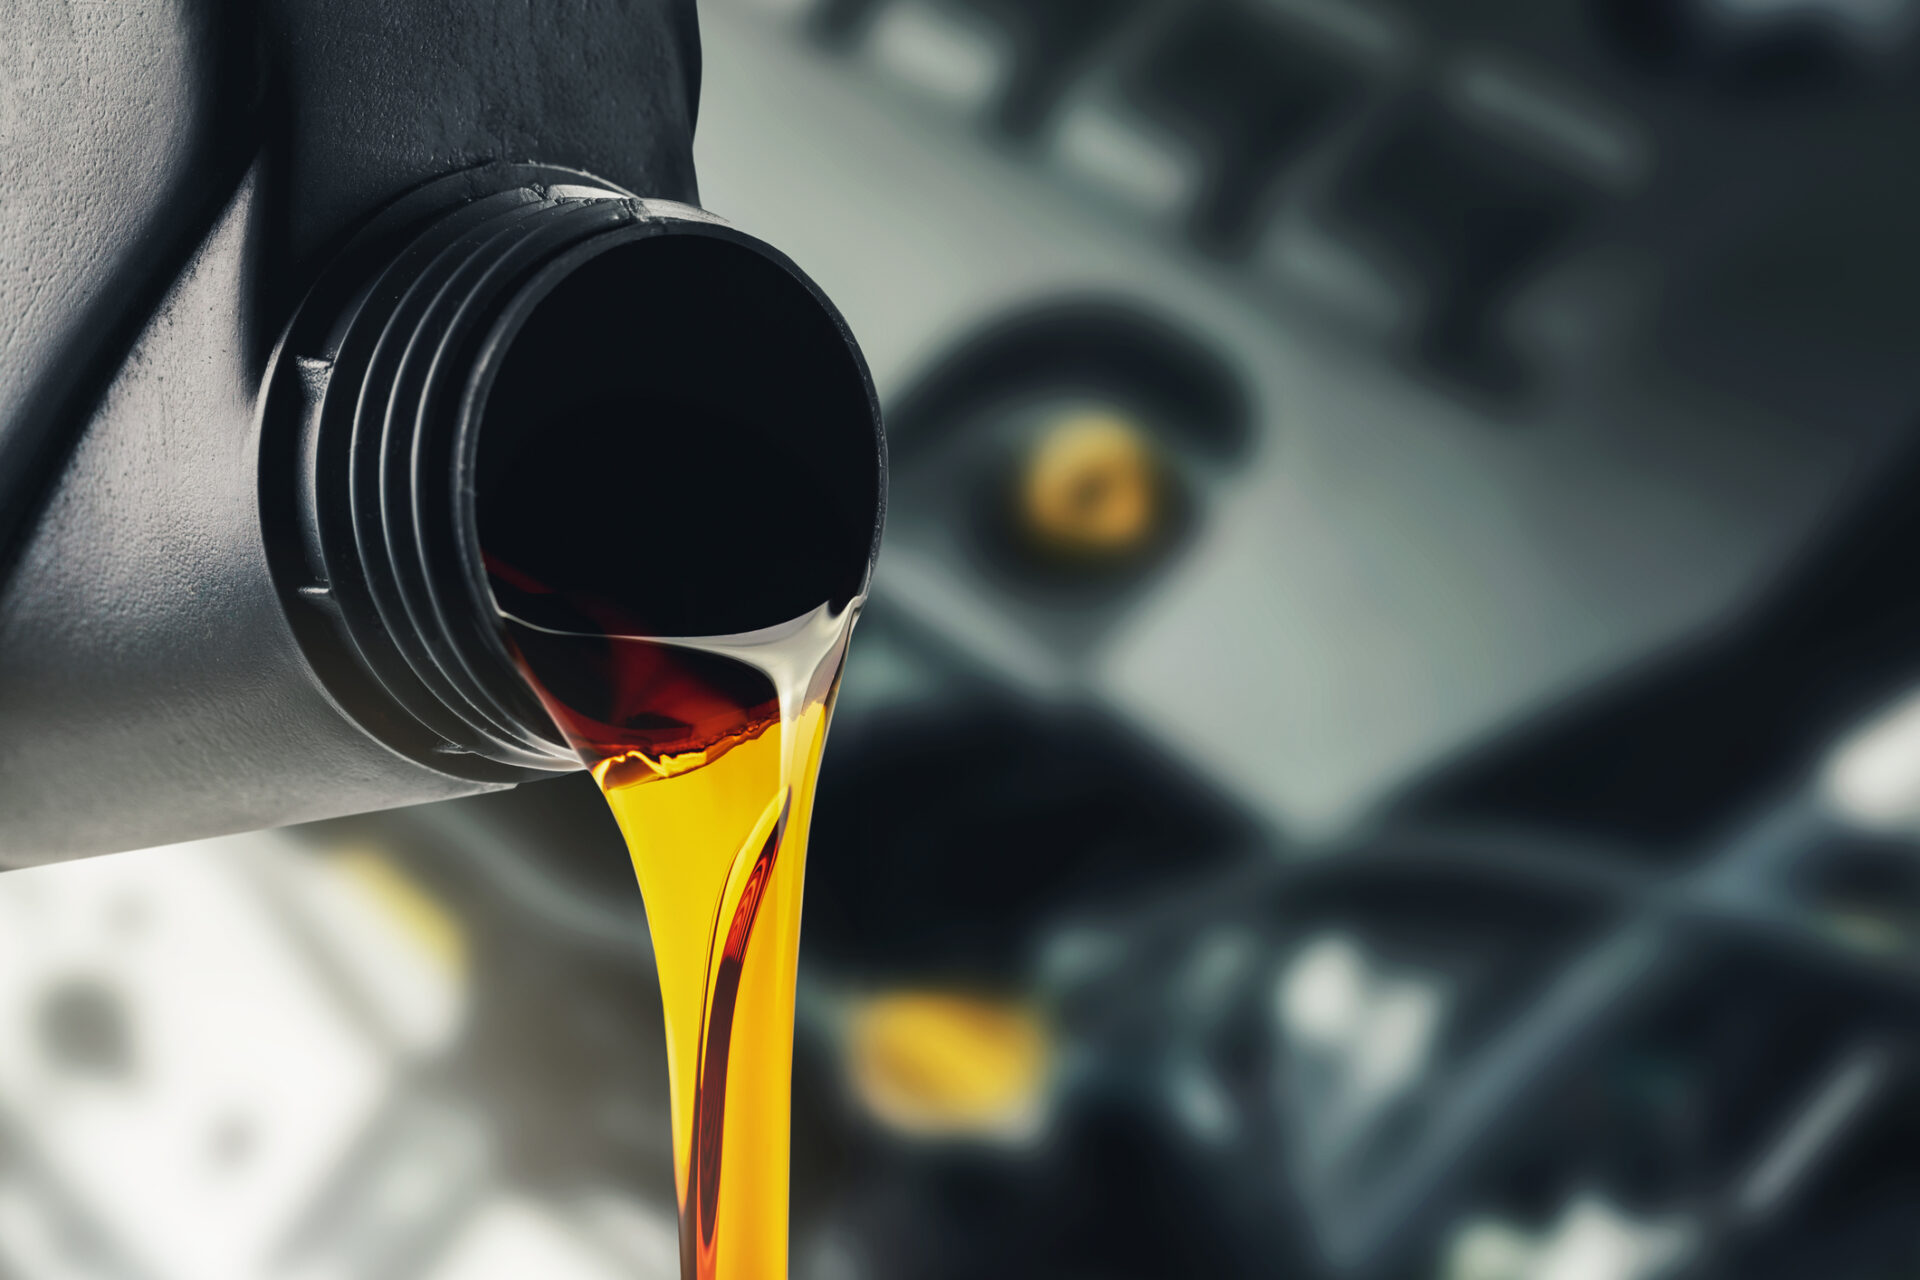 How to Change Oil in Your Car